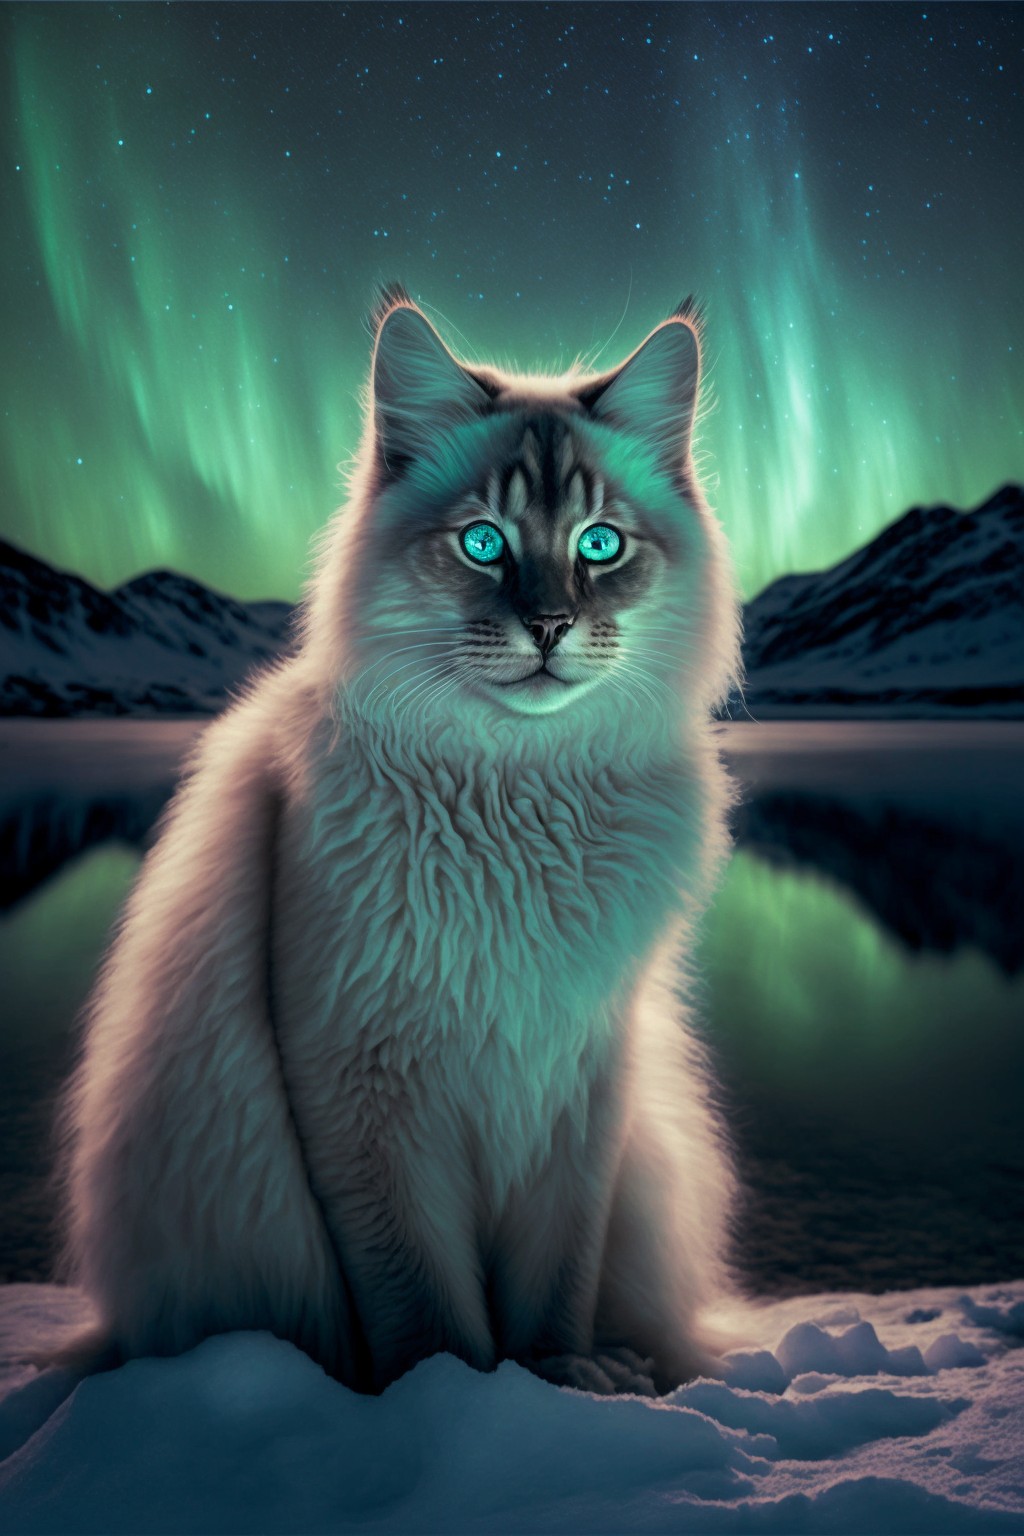 Snow cat under the northern lights